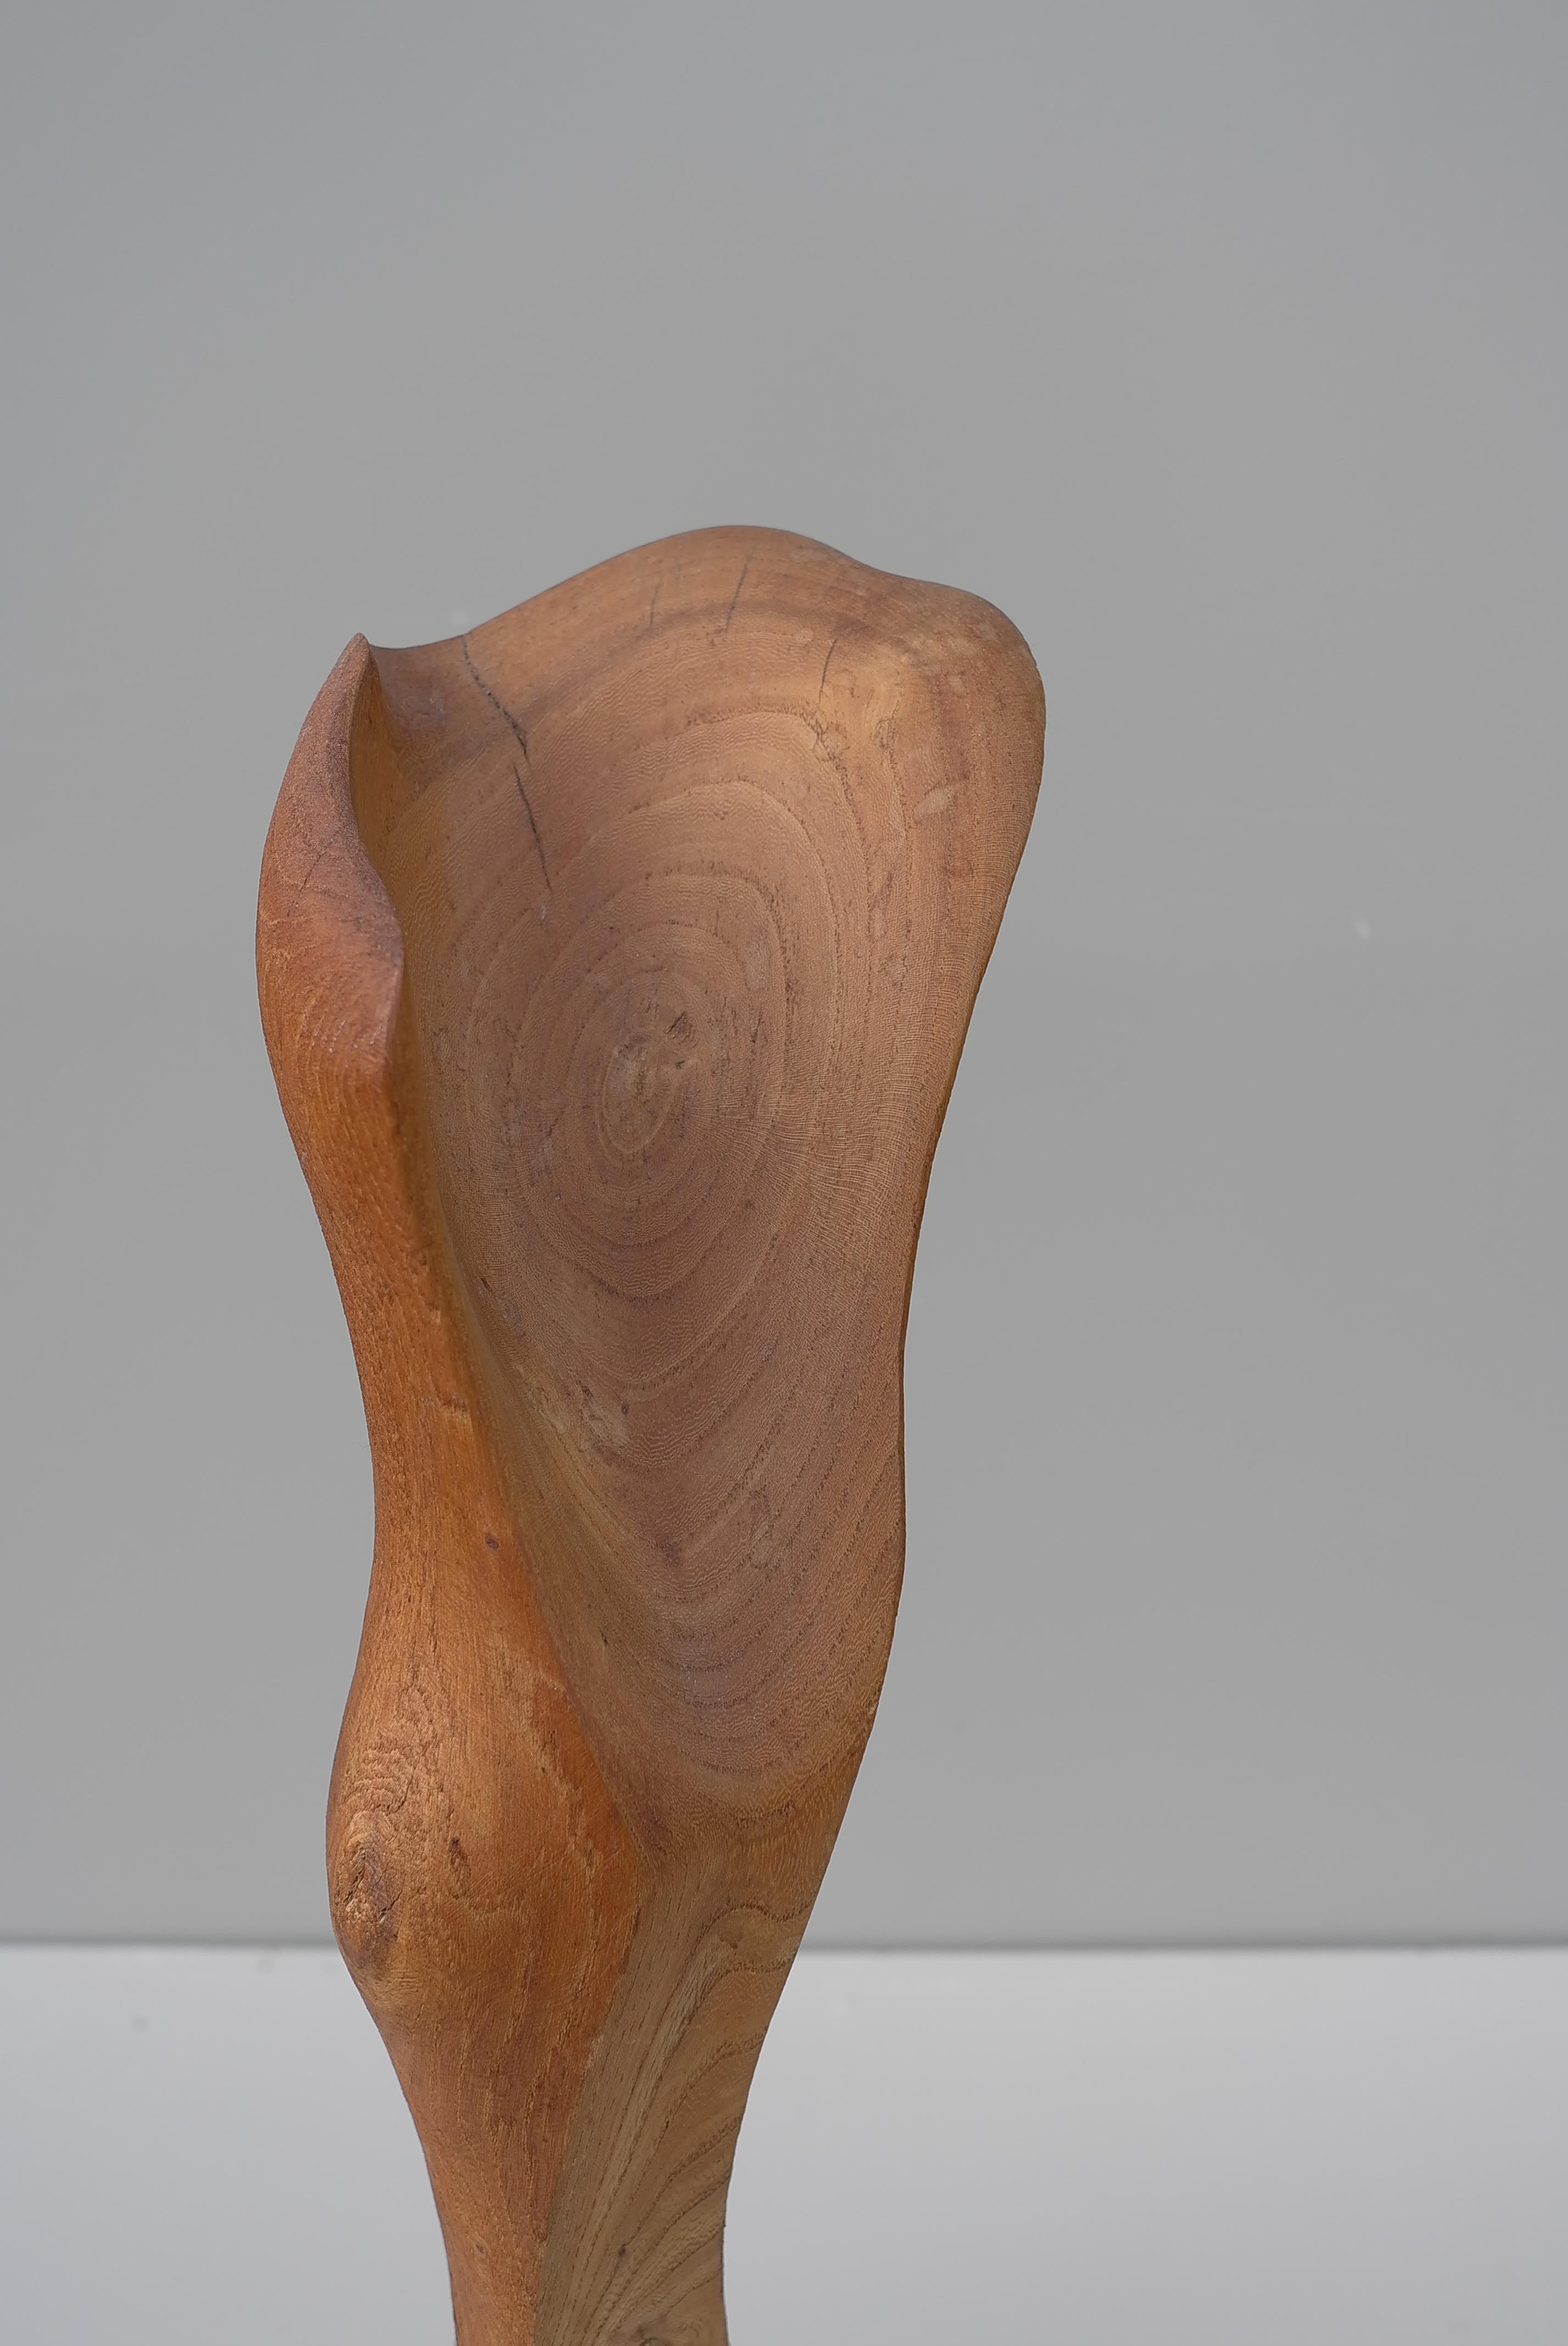  Abstract Mid-Century Modern Organic Wooden Sculpture, 1960's For Sale 2